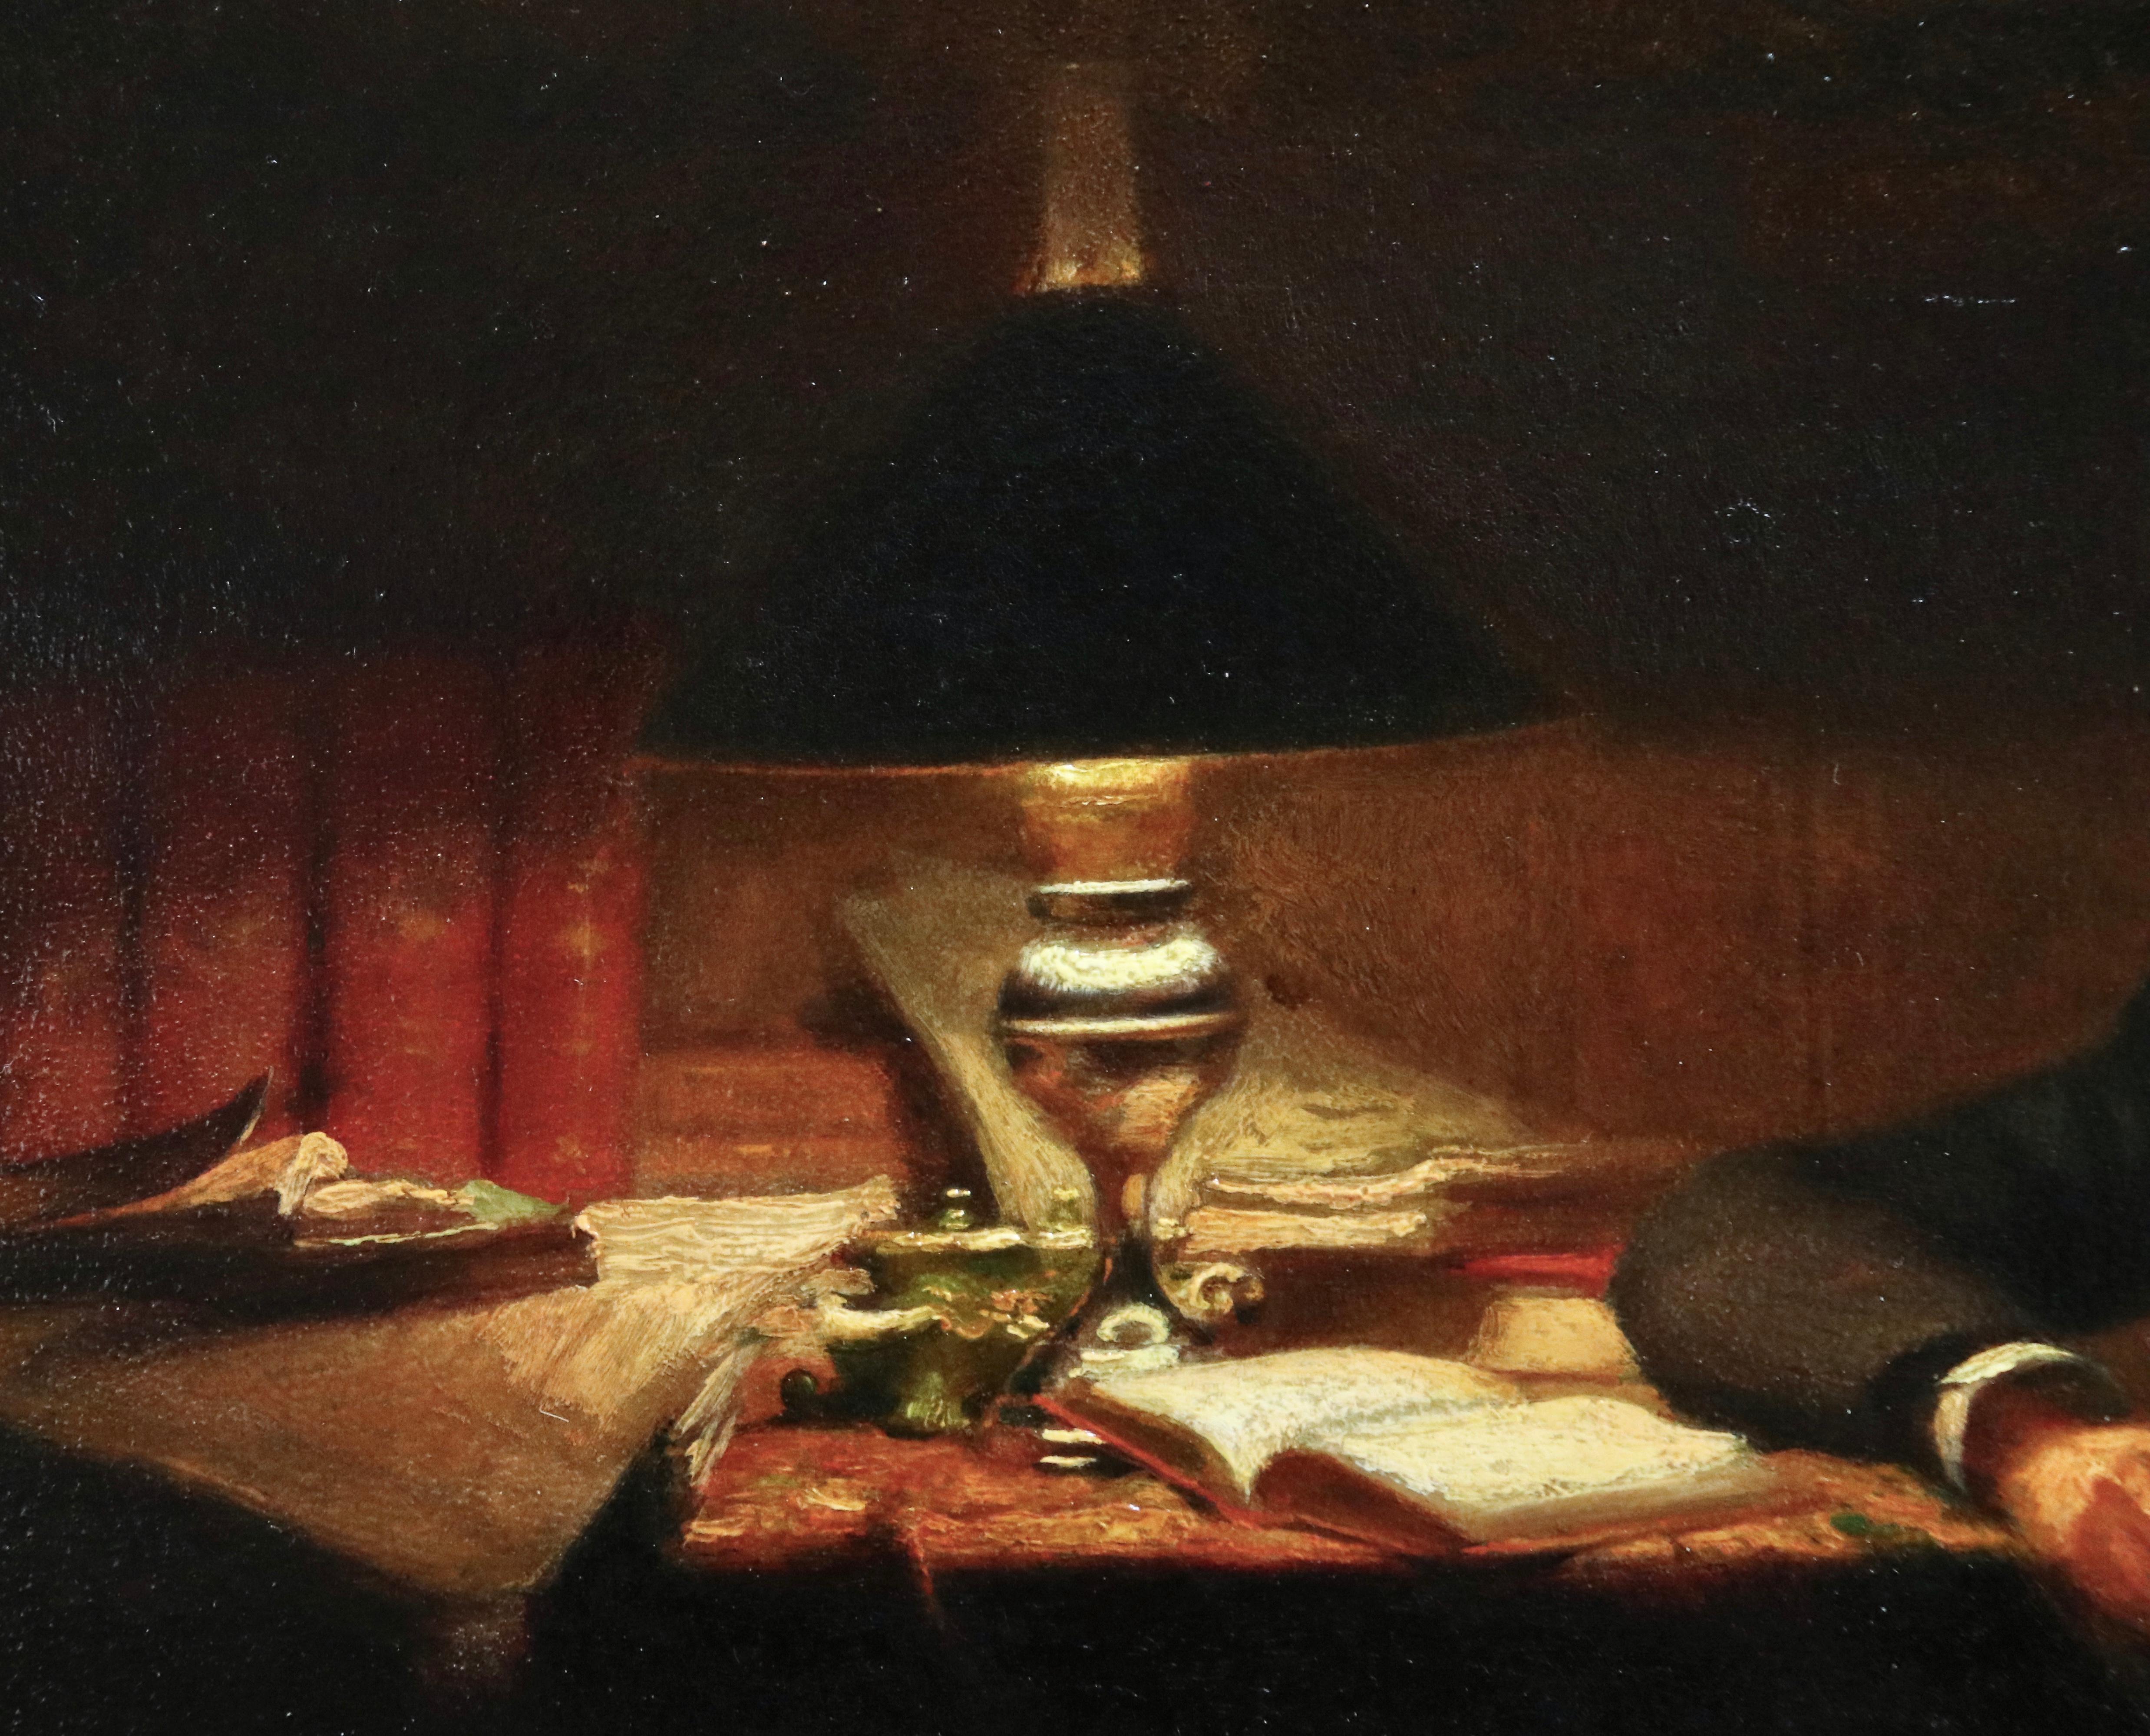 Oil on panel circa 1910 by Victor Lecomte depicting a gentleman reading at a desk strewn with books by the light of a lamp. Signed lower left. Framed dimensions are 17.5 inches high by 22 inches wide.

Victor Lecomte trained with Achille Gilbert.